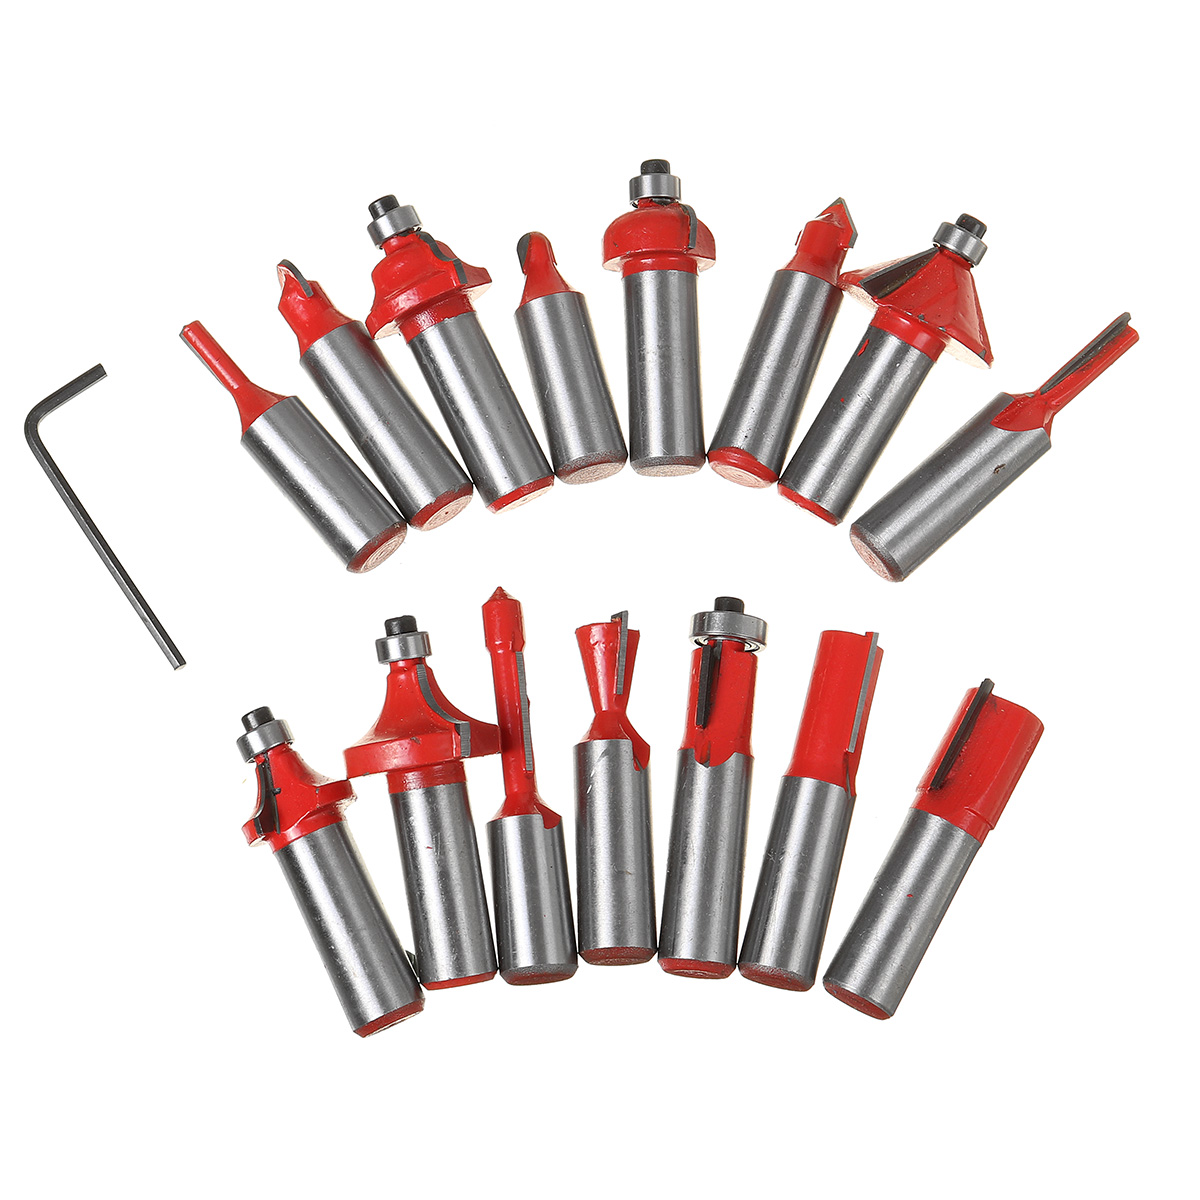 1215pcs-12-14-Inch-Milling-Cutter-Router-Bit-Set-for-Woodworking-1675937-3